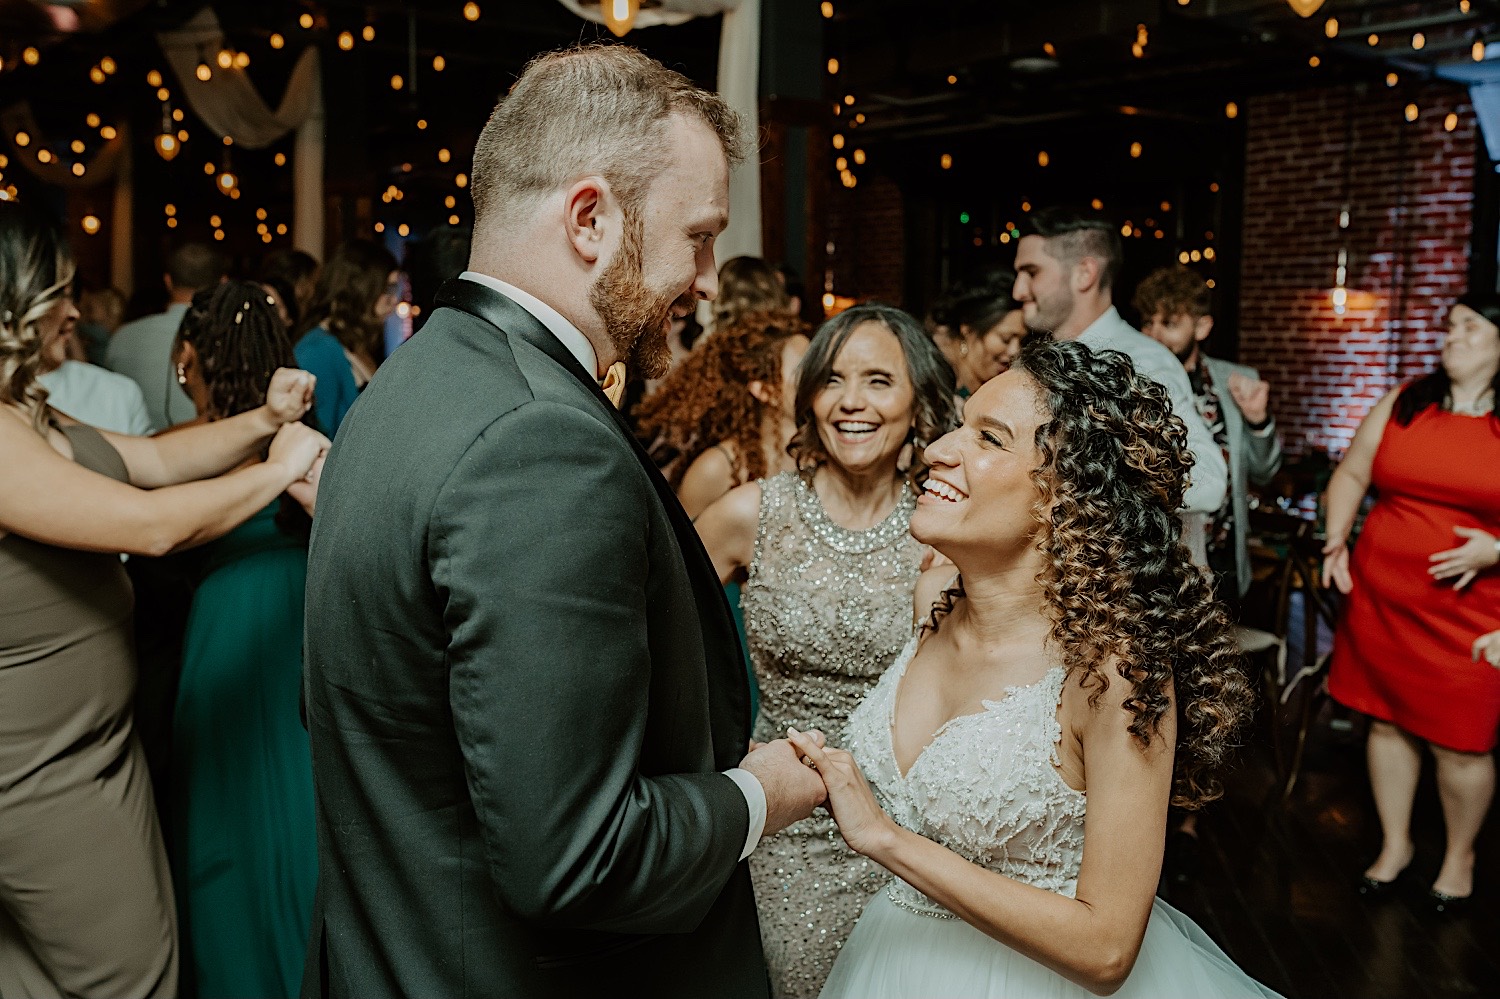 A bride and groom smile at one another while holding hands as they dance with their guests during their wedding reception